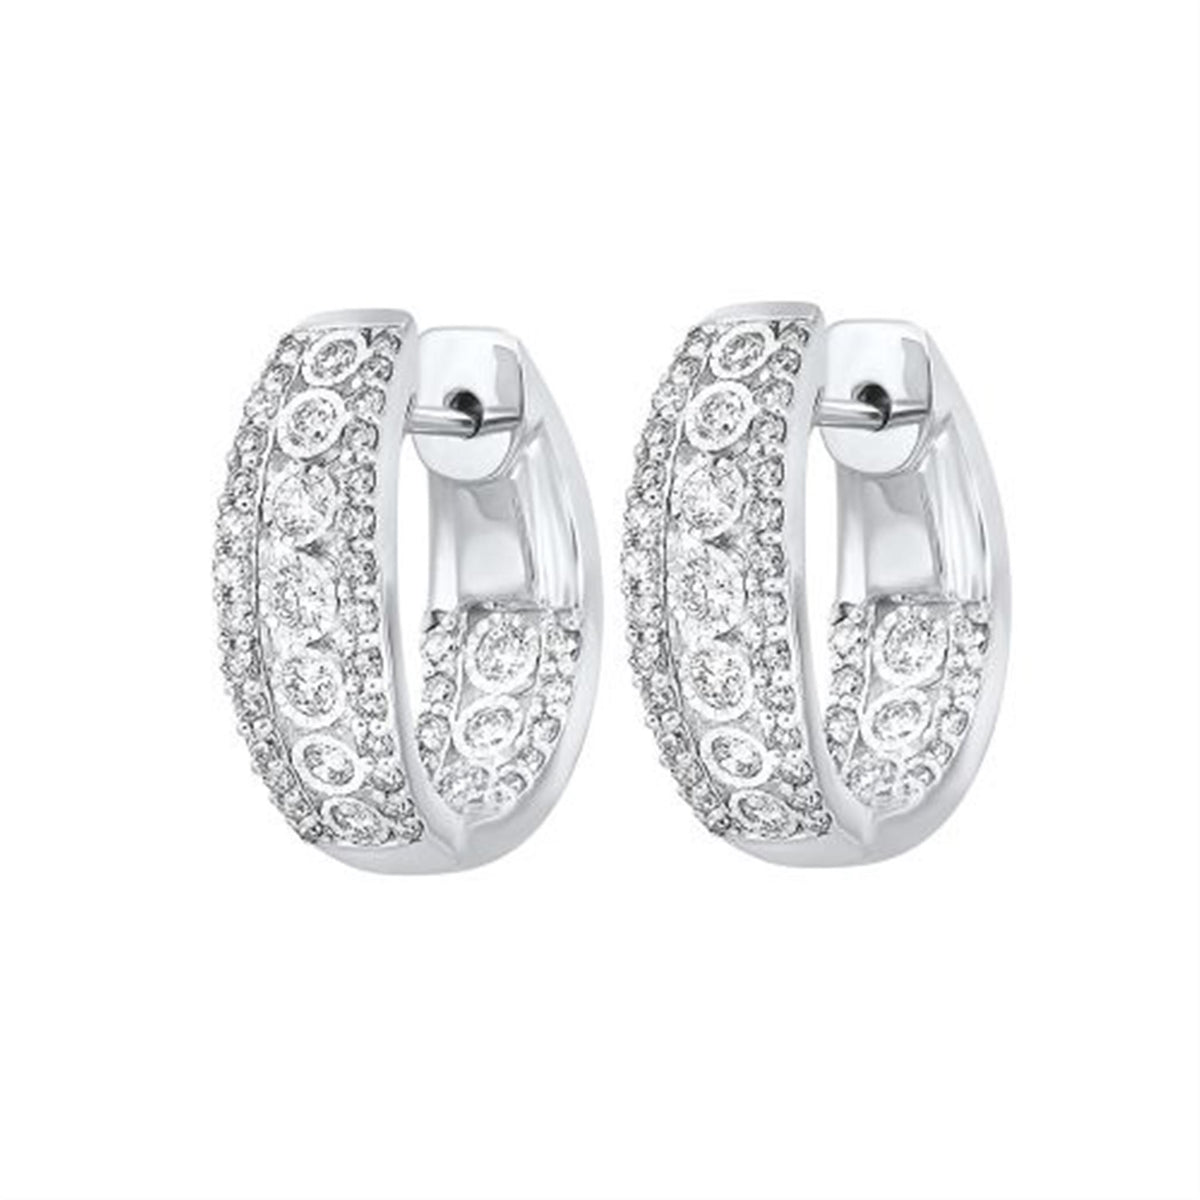 14Kt White Gold Geometric Hoop Earrings With 1.00cttw Natural Diamonds